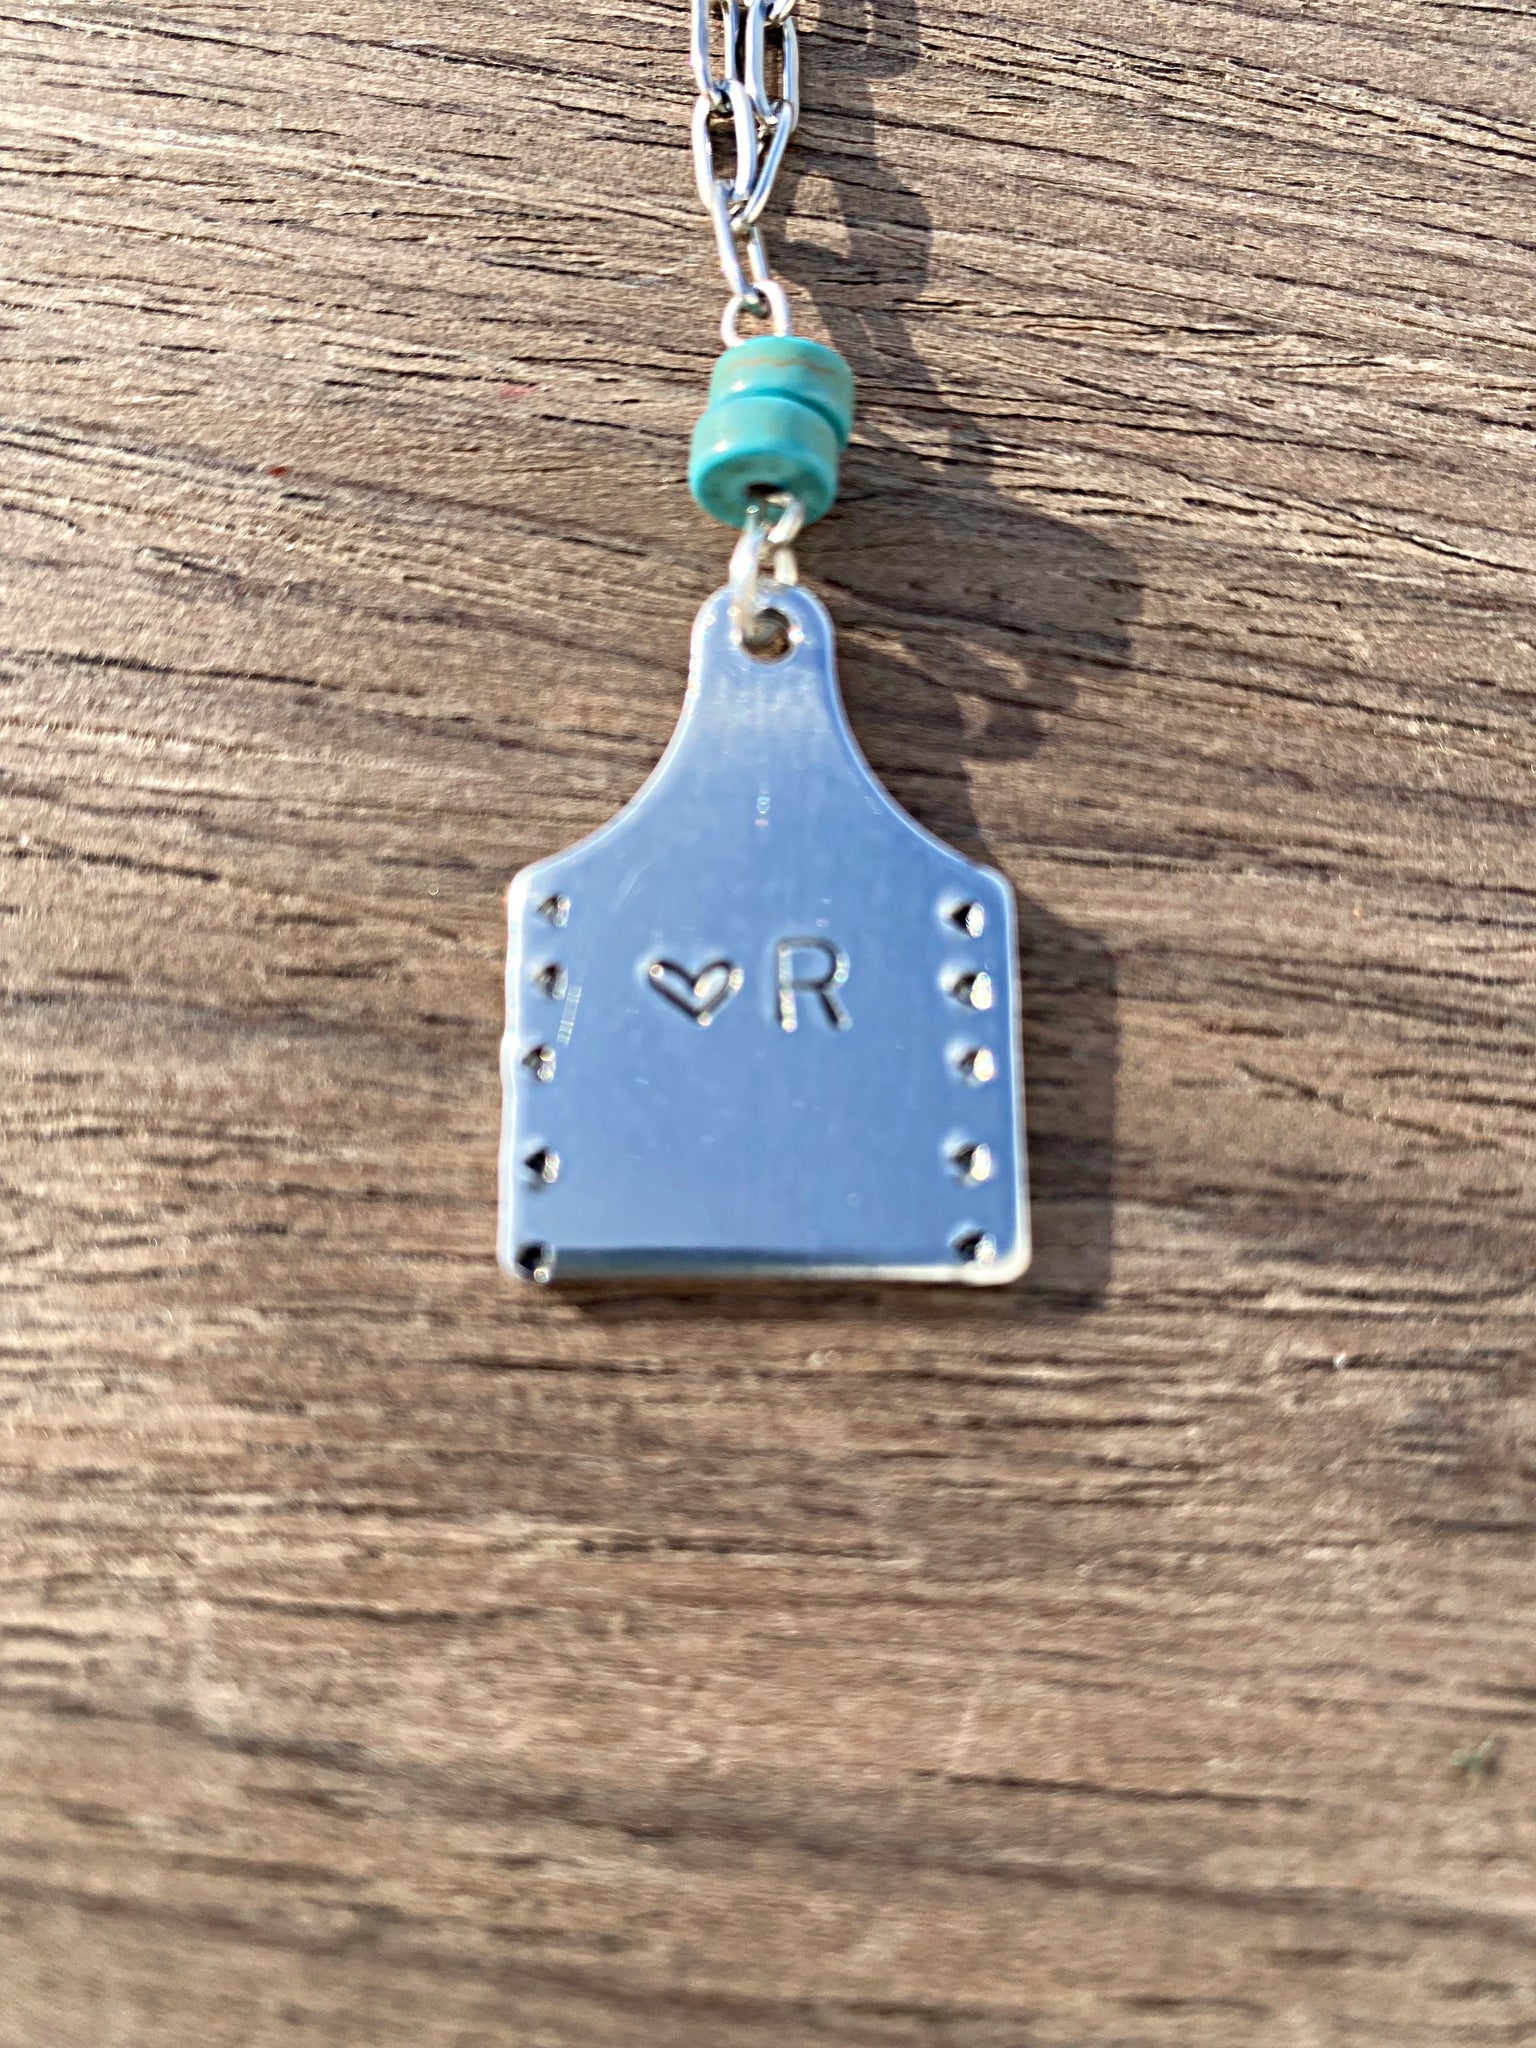 Design your own ear tag jewellery– cornishbluebelle